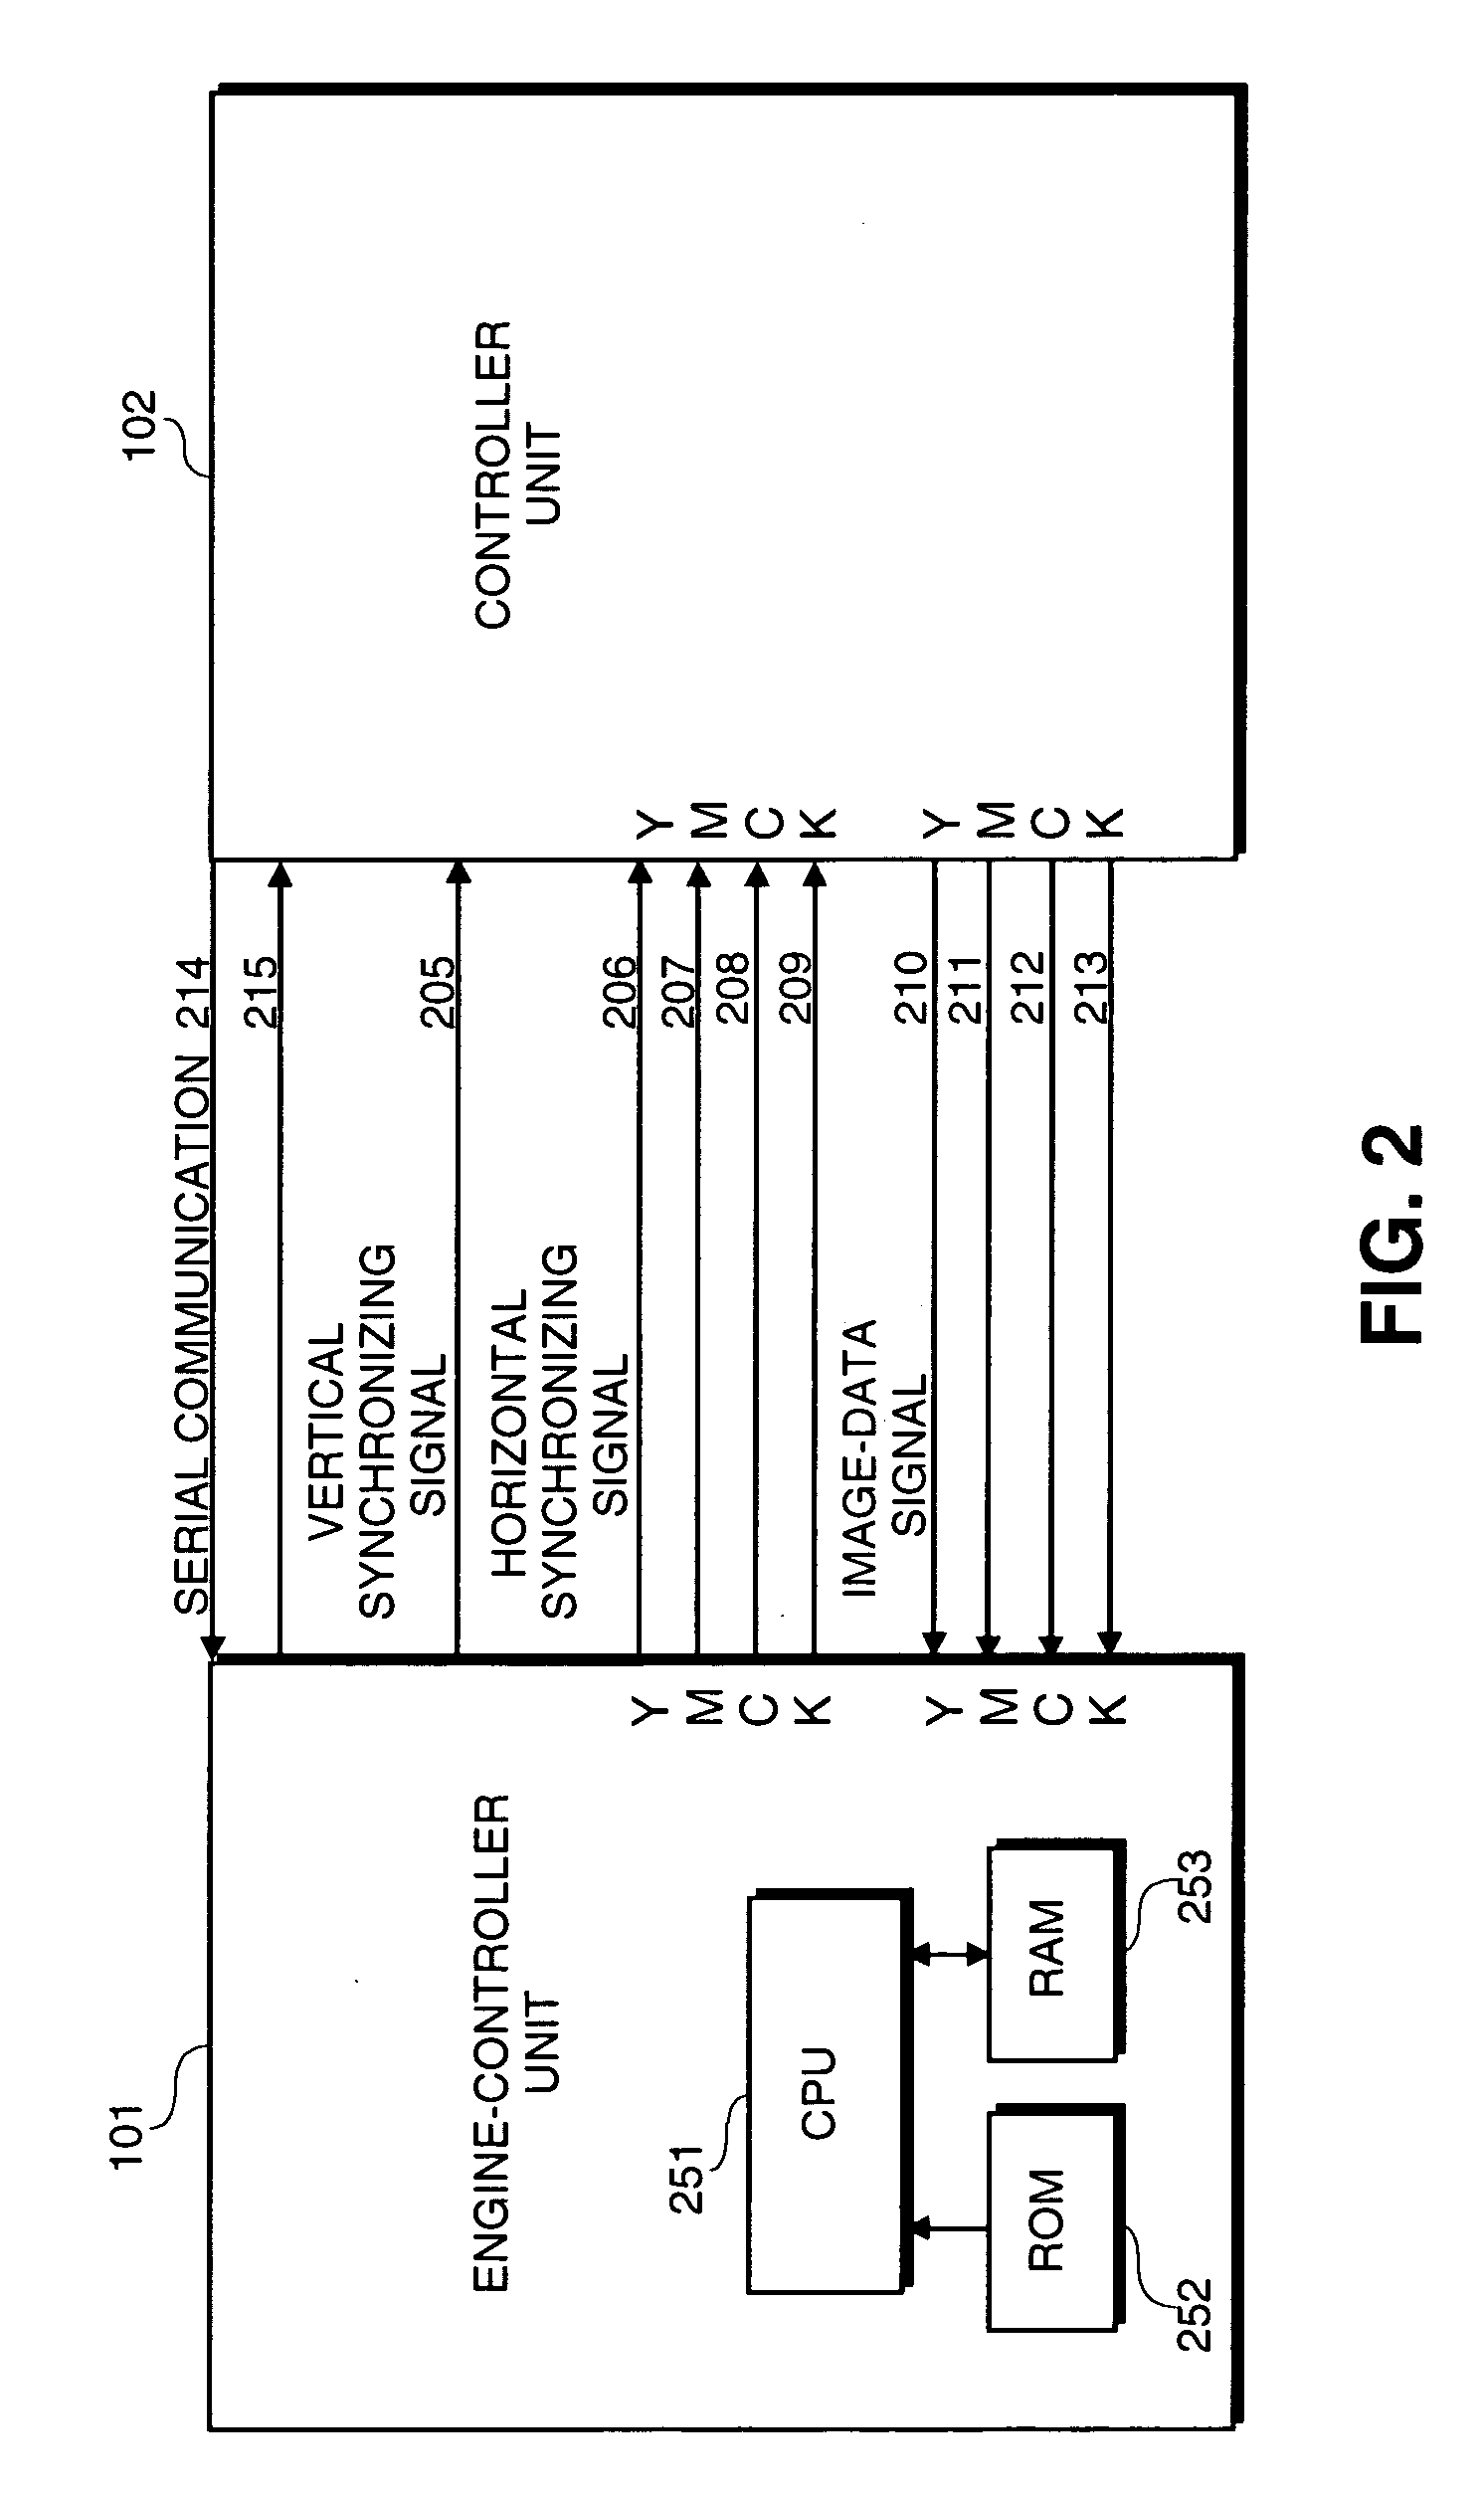 Efficient rasterization system and method